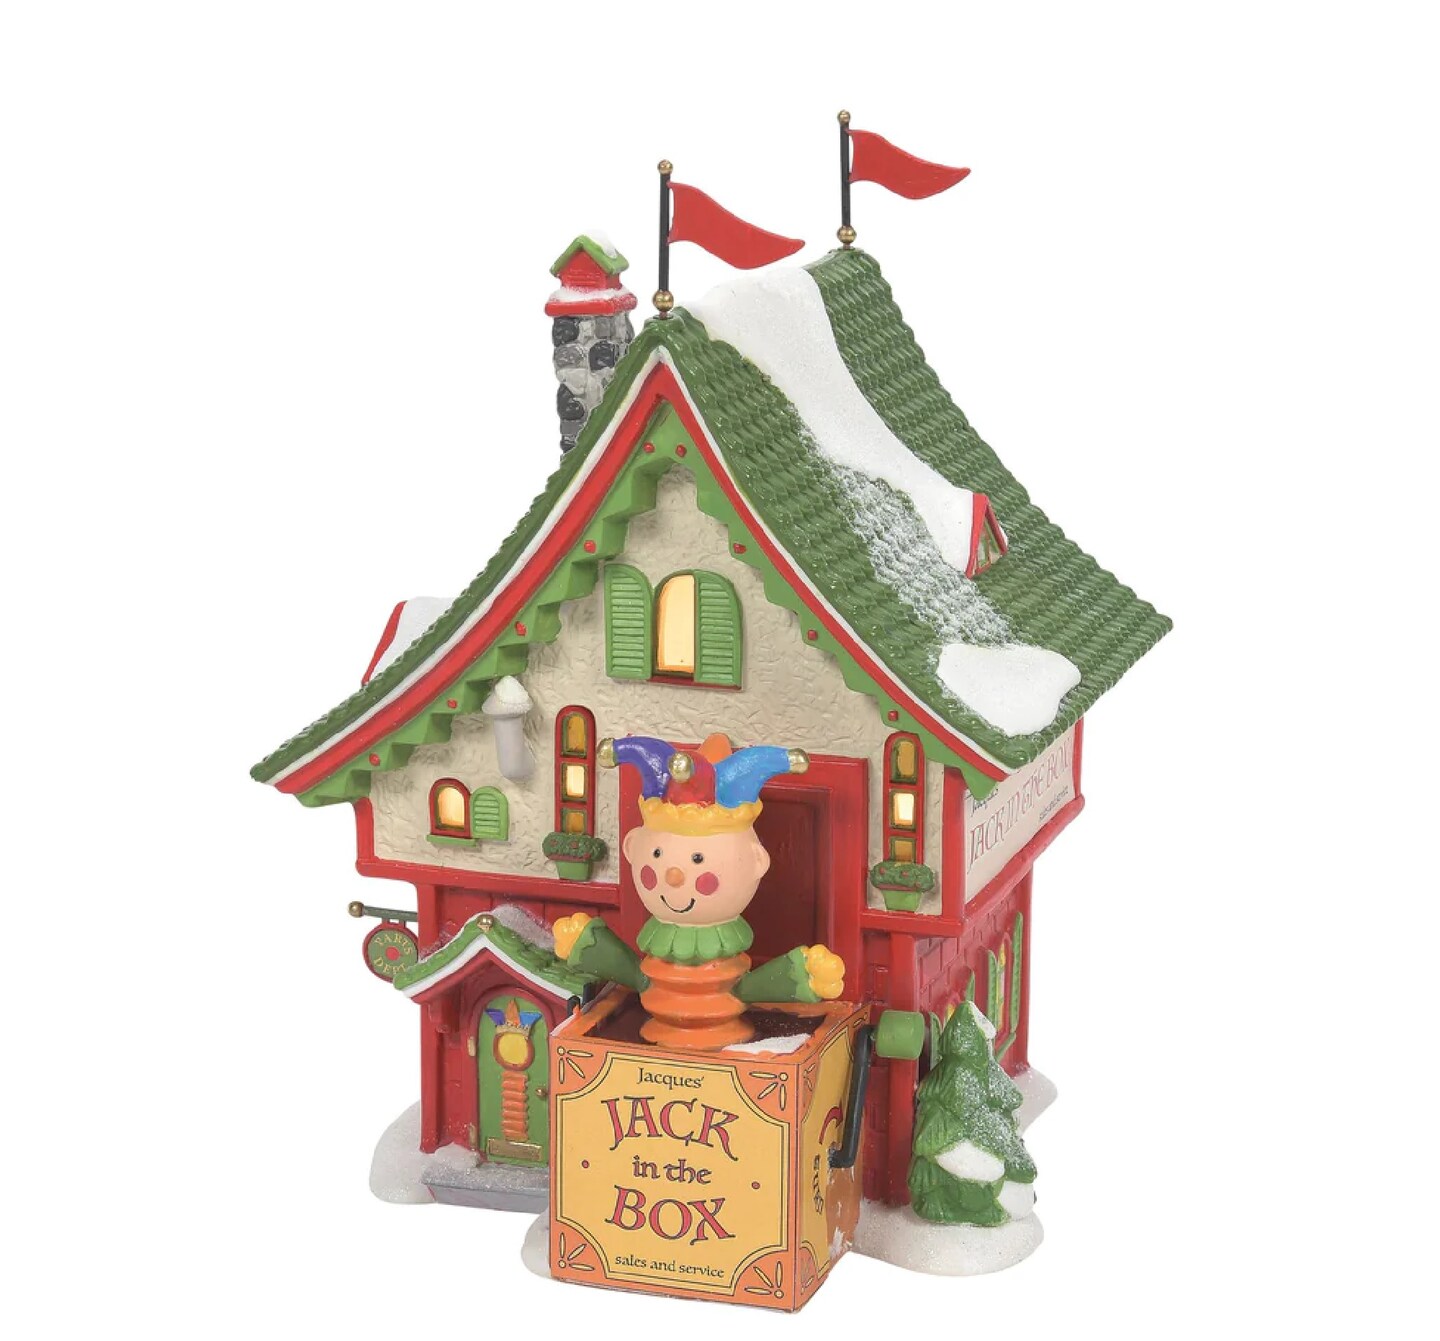 Department 56 Department 56 North Pole Lighted Christmas Jacques Jack In The Box Shop #6011411